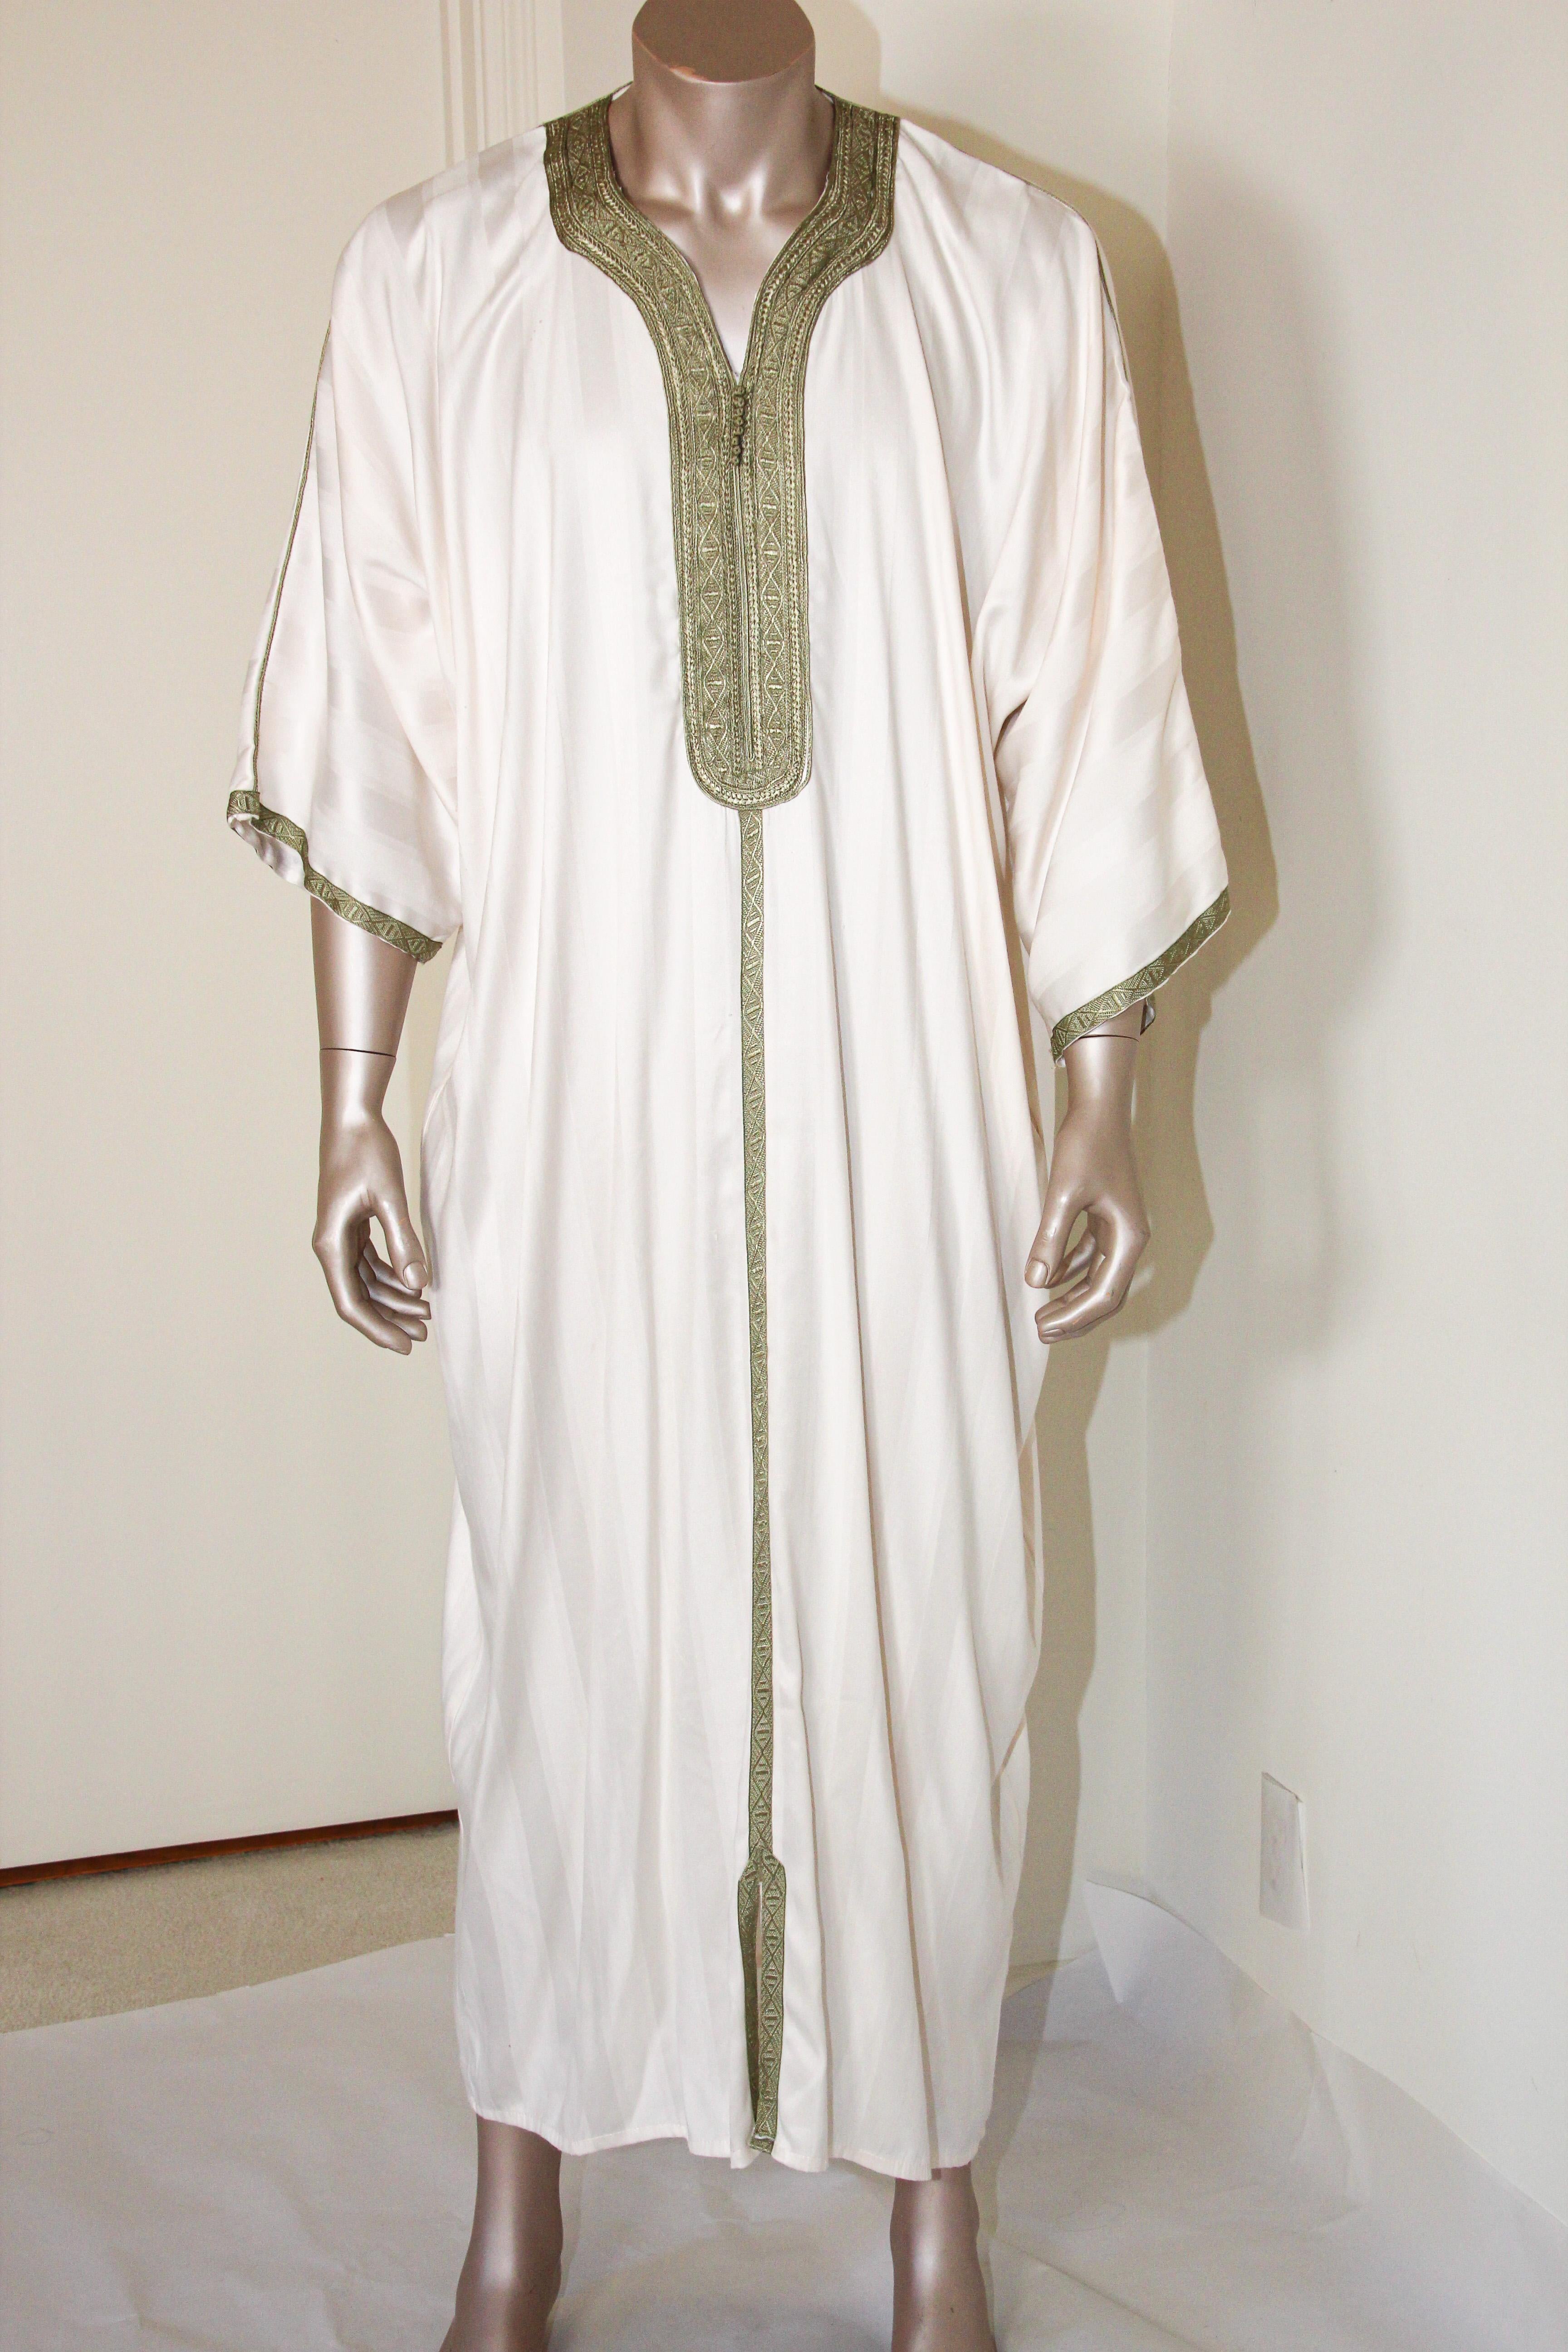 Moroccan gentleman vintage caftan embellished with green trim.
In Morocco, fashion preserves its traditional style inherited from great civilizations that found their way to Northwest Africa, such as the Ottomans and the Moors.
Moroccan fashion